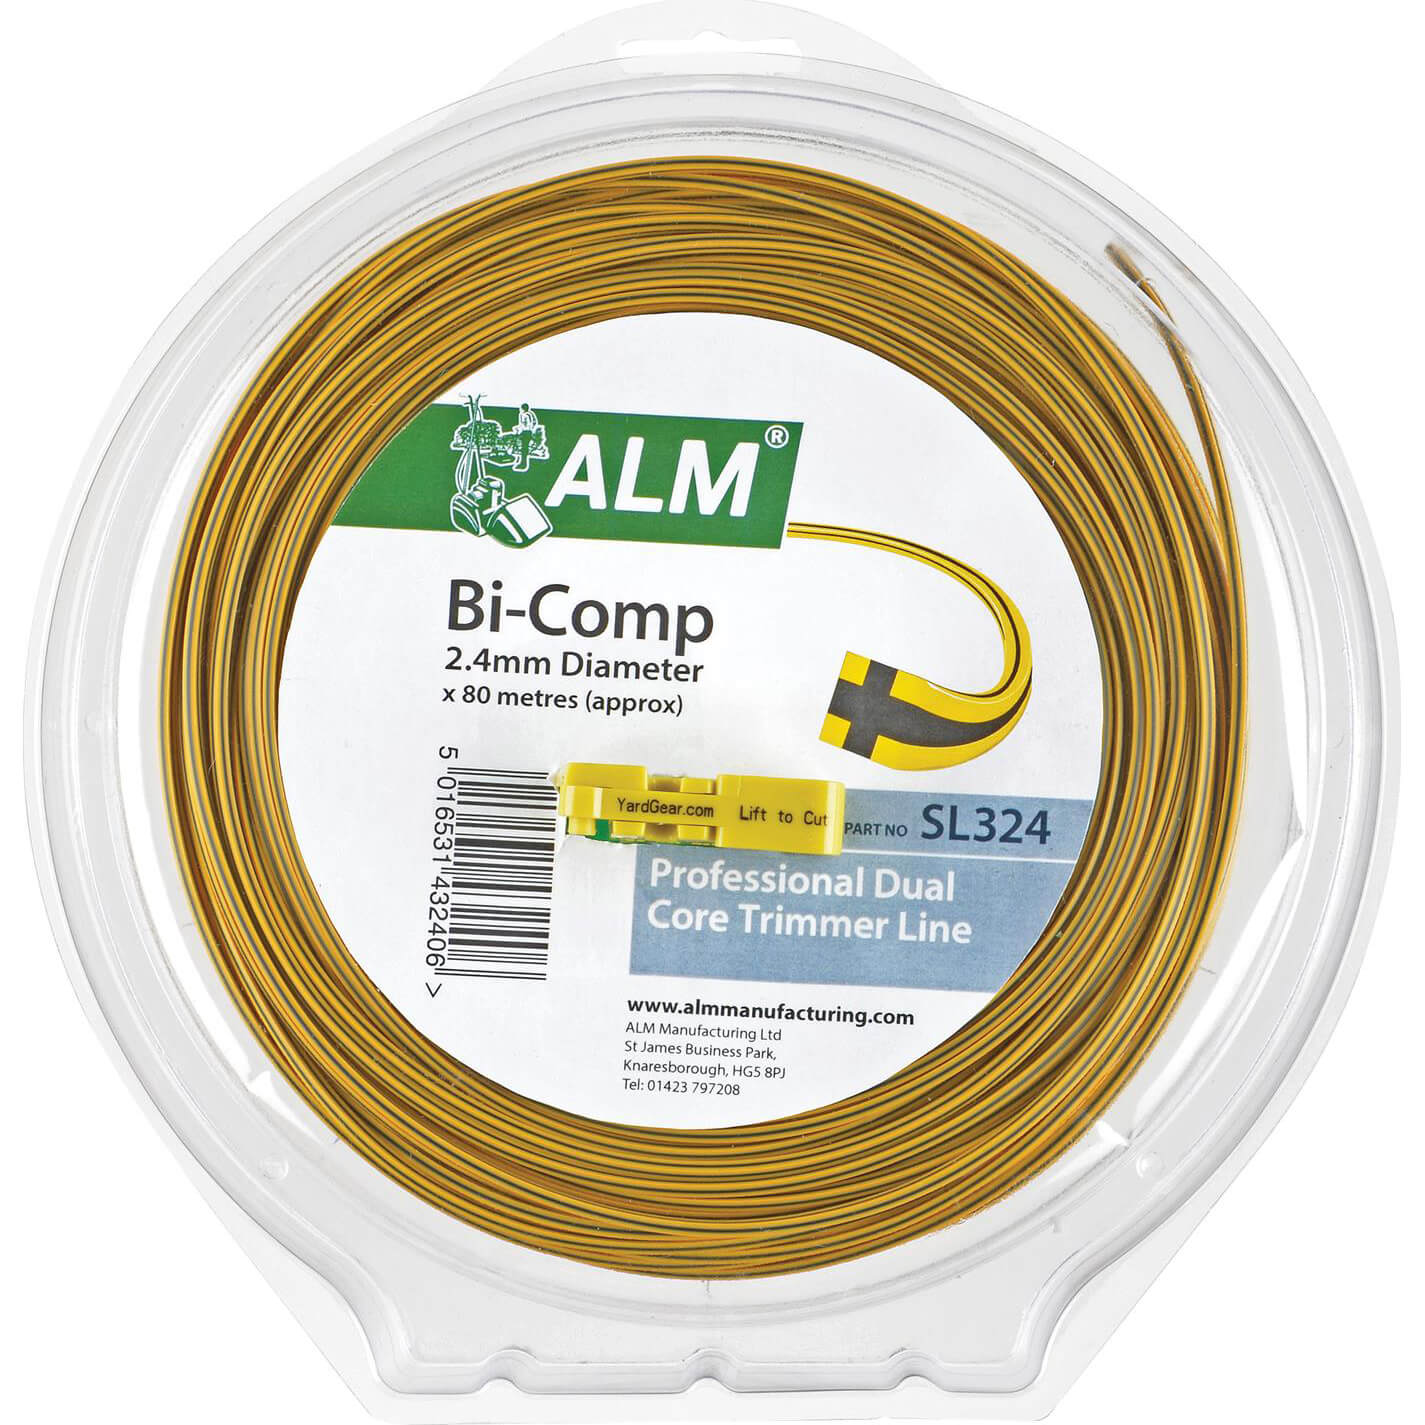 Image of ALM SL324 Replacement Bi-Component Square Grass Trimmer Line 2.4mm x 80m for All Medium Duty Petrol Grass Trimmers using 2.4mm Line Pack of 1